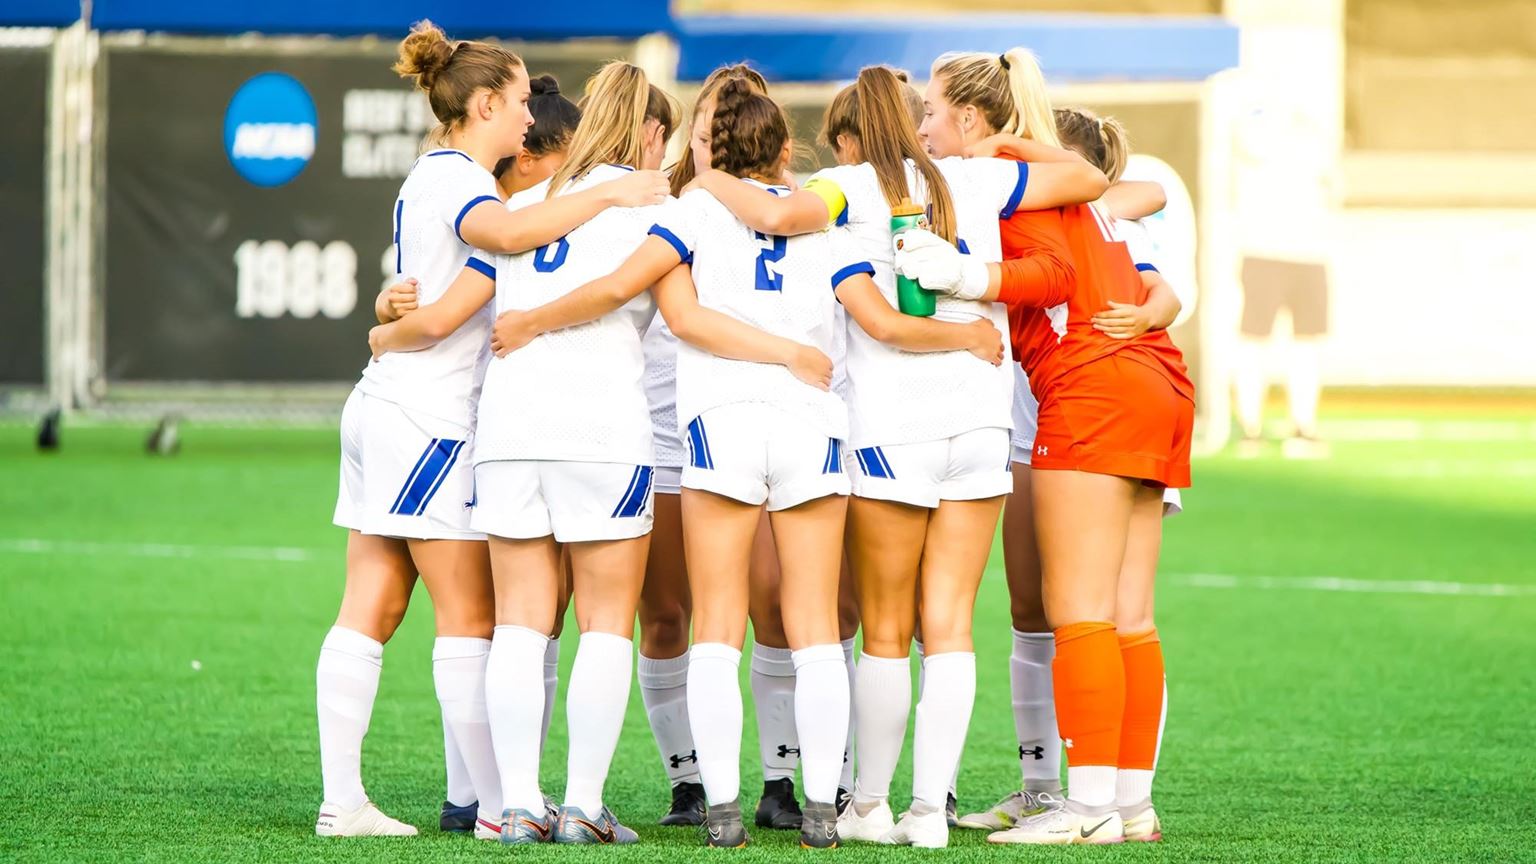 The Seton Hall women's soccer team huddles before a game against Marquette.